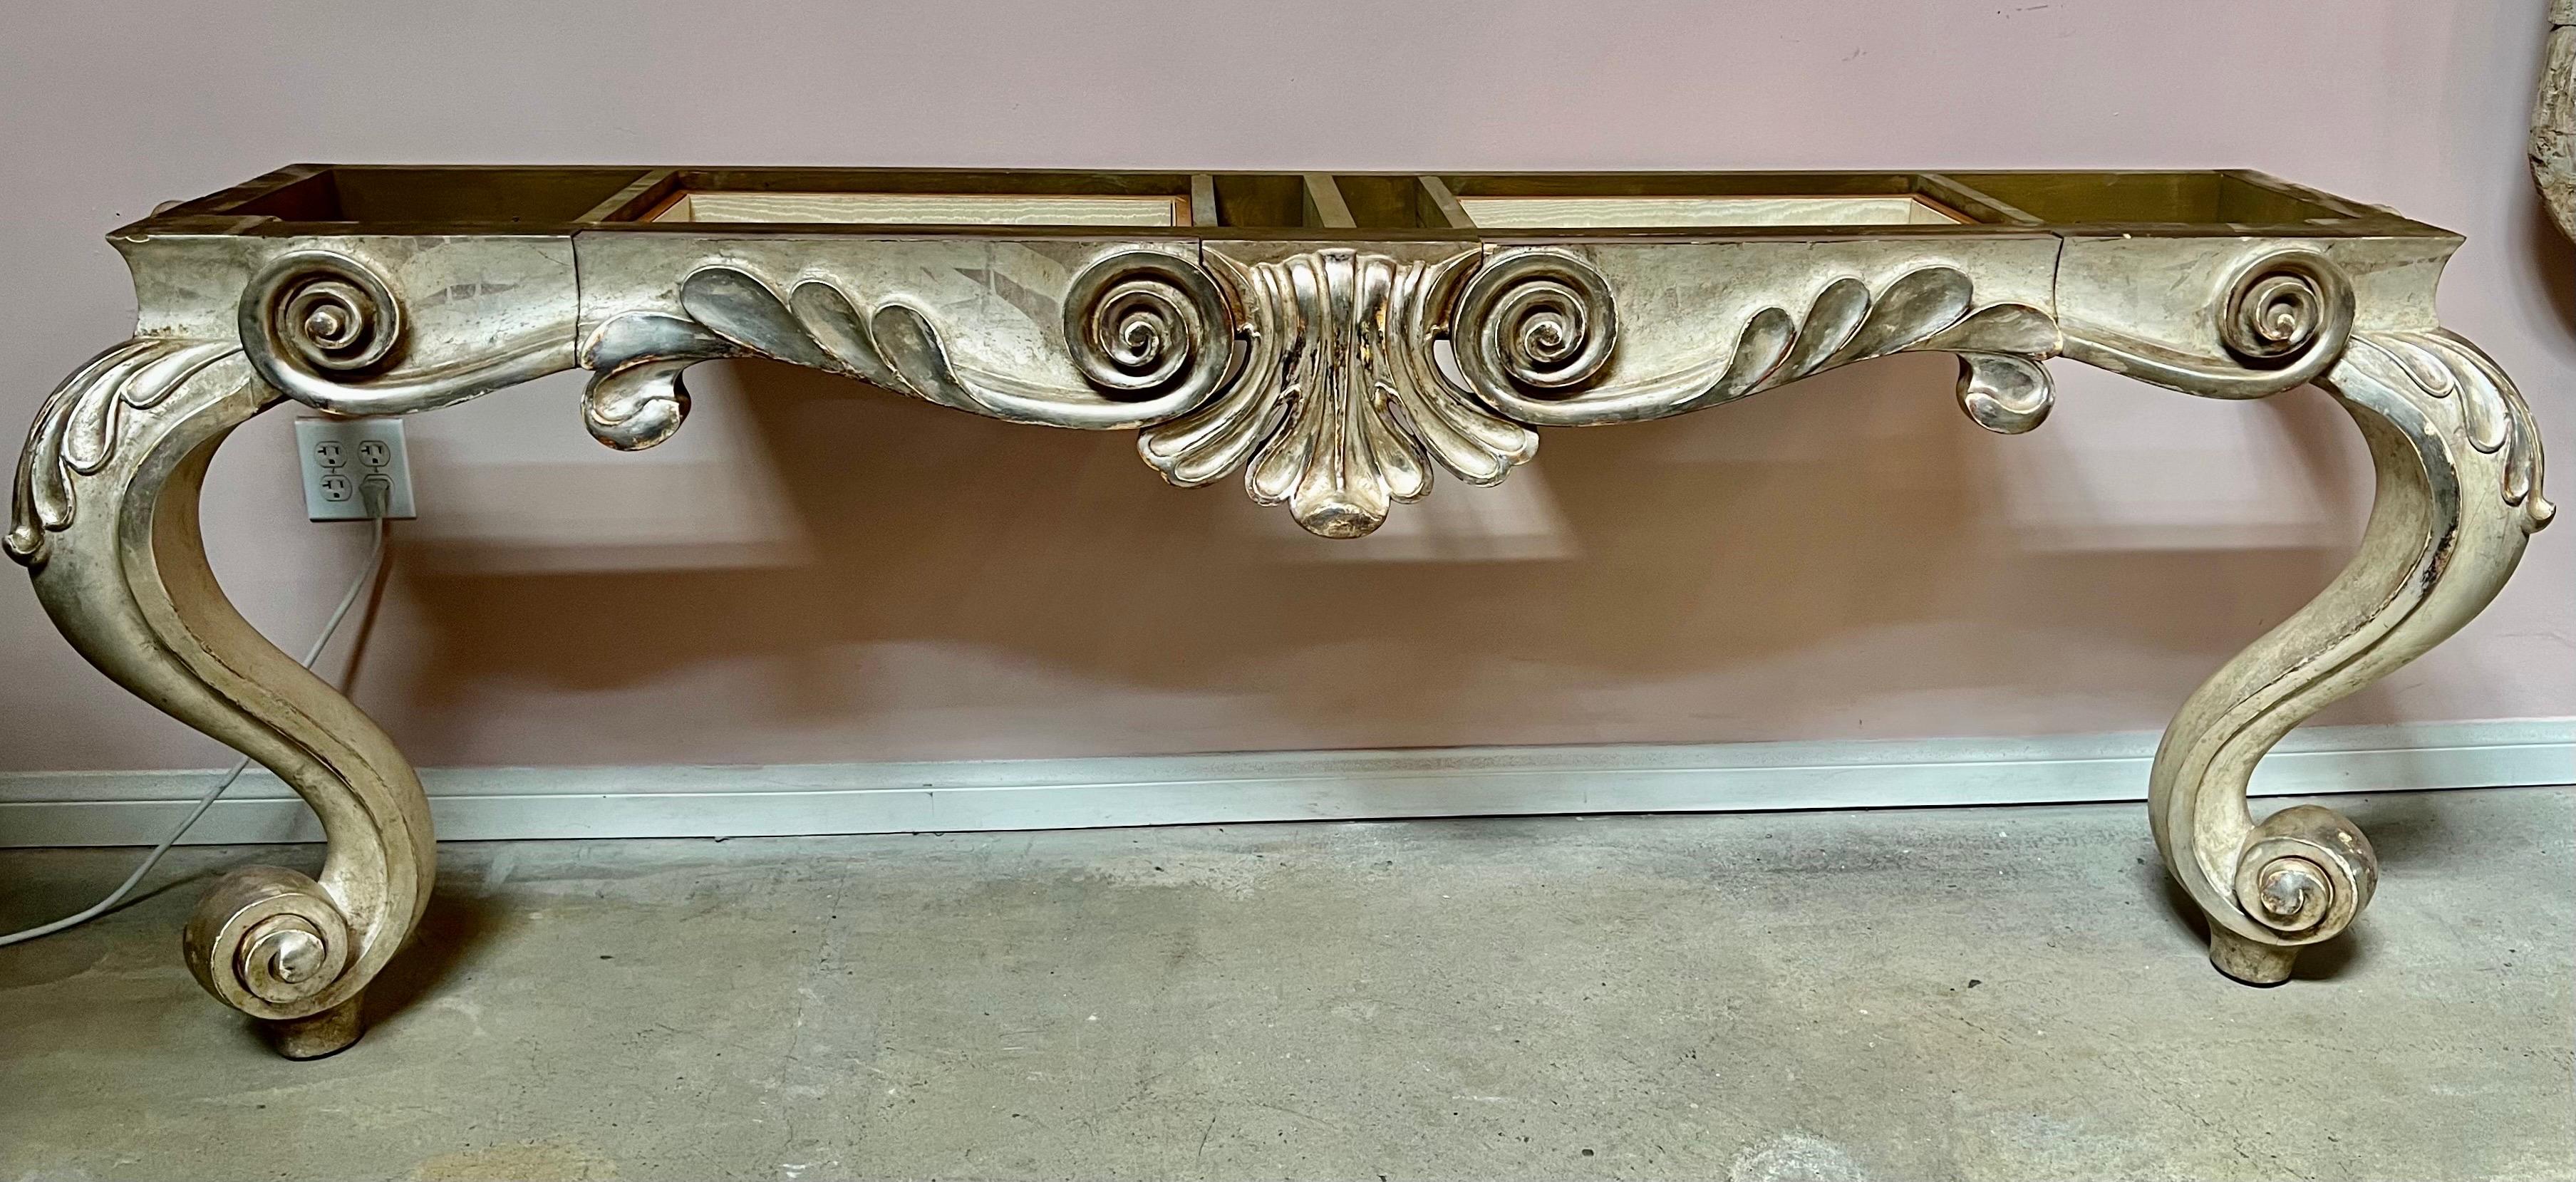 Monumental size Louis XV style French painted & parcel gilt console with marble top. The console stands on two cabriole legs that end in scrolled feet. Center drawer for storage. Cream marble top with single ogee bullnose edge detail.